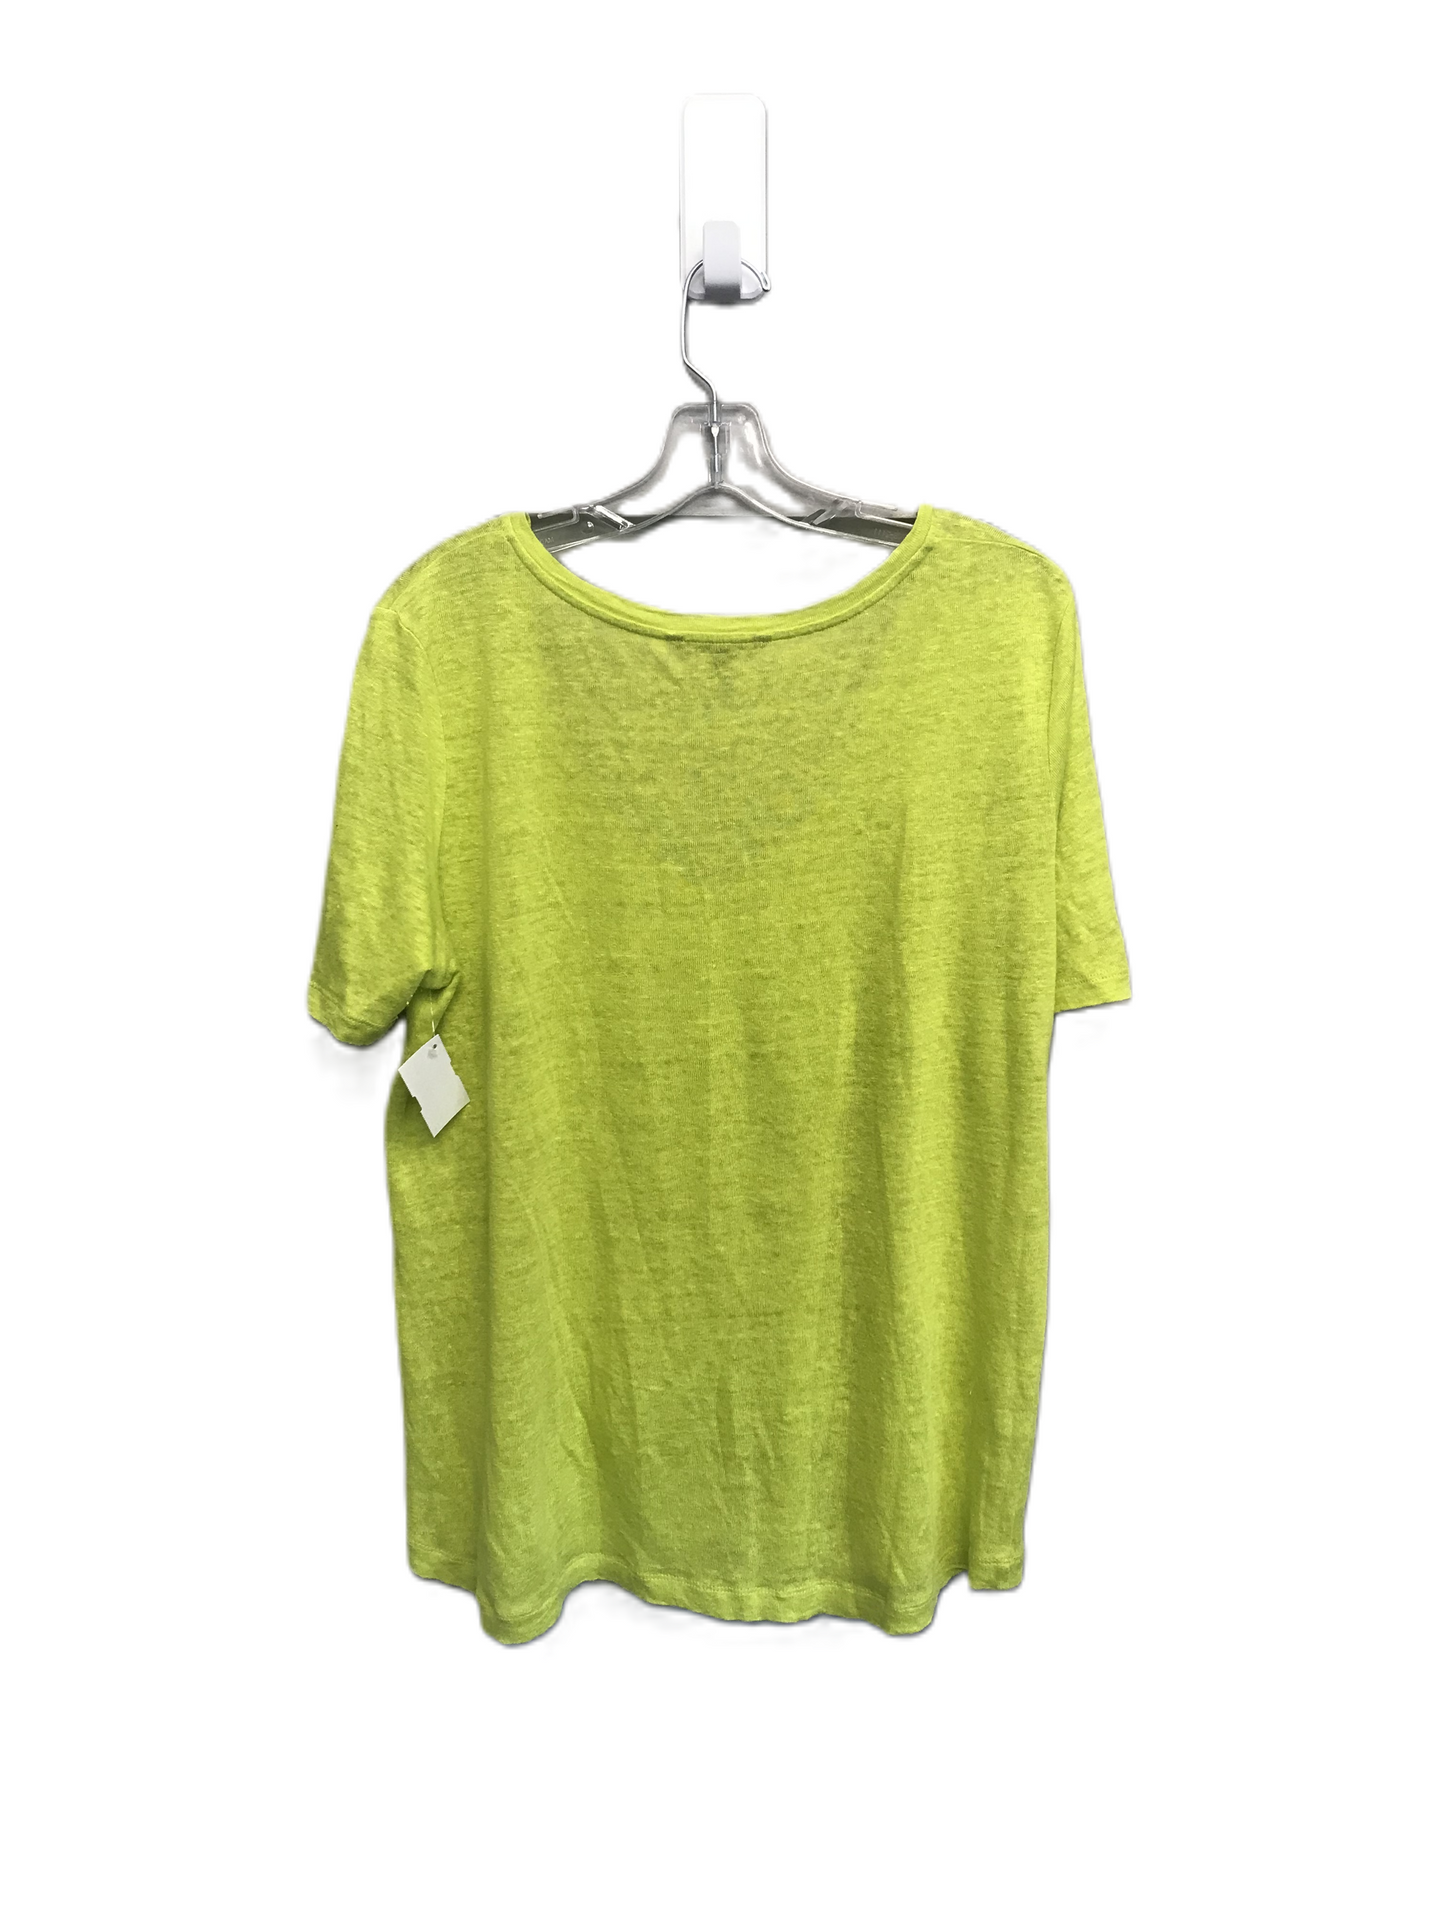 Chartreuse Top Short Sleeve By Banana Republic, Size: L